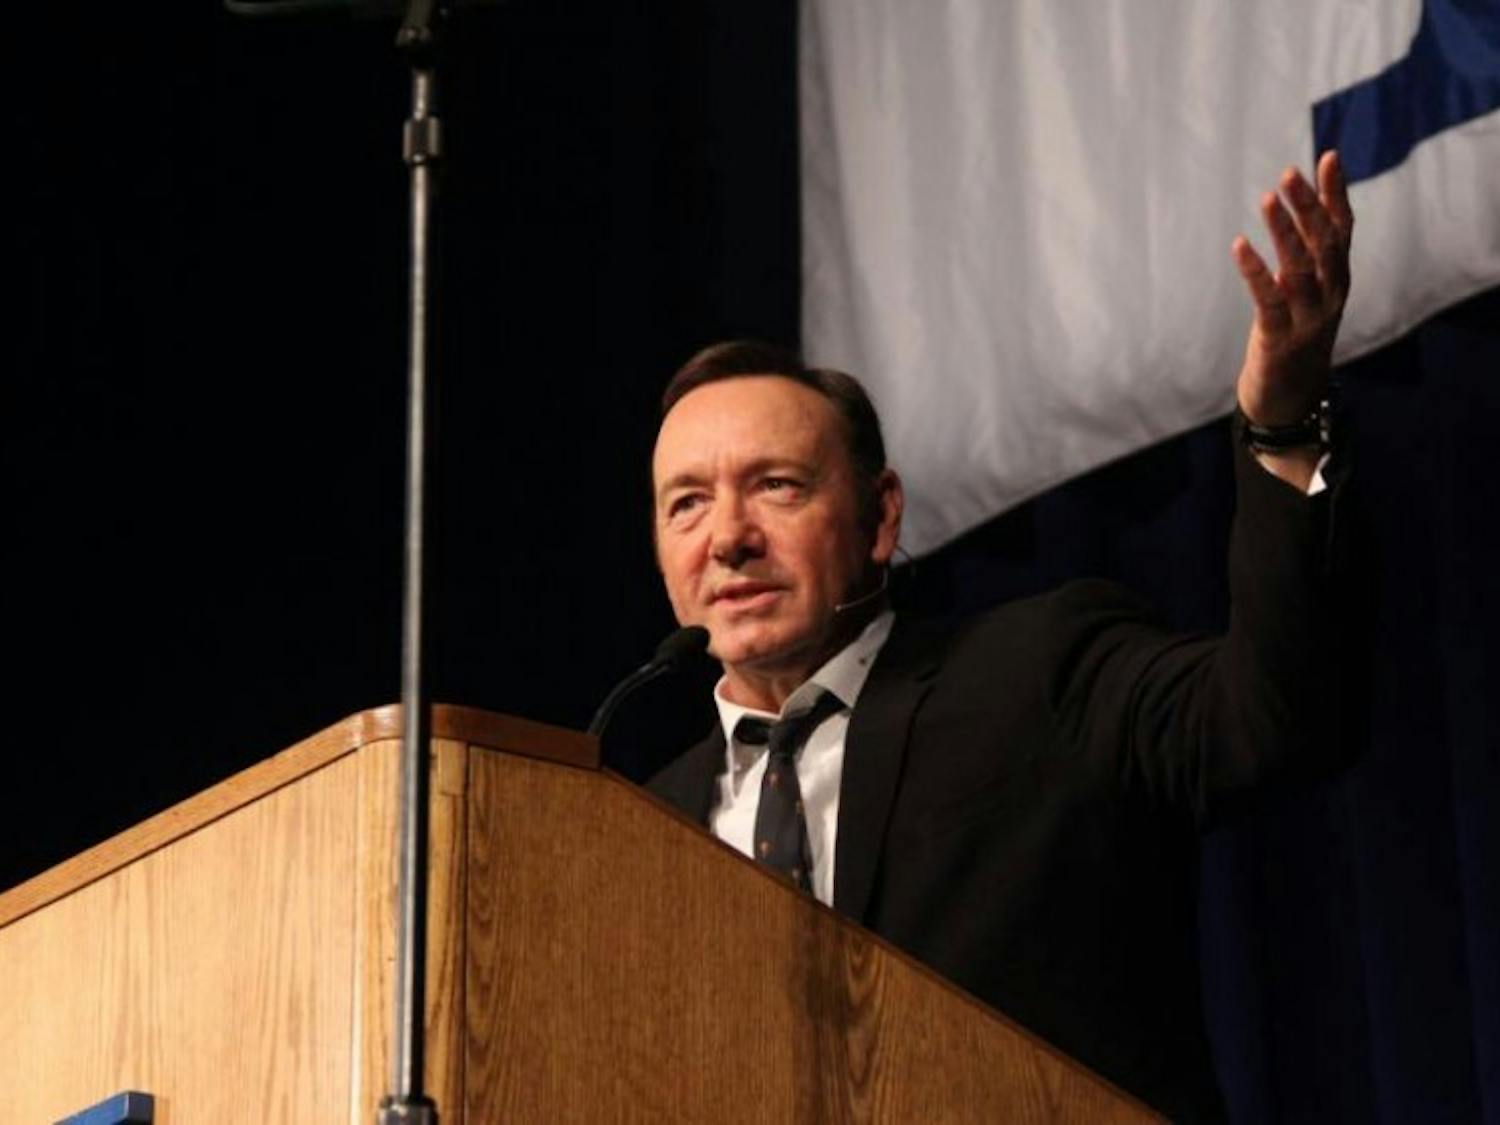 Kevin Spacey spoke as a Distinguished&nbsp;Speaker at Alumni Arena Wednesday night.&nbsp;